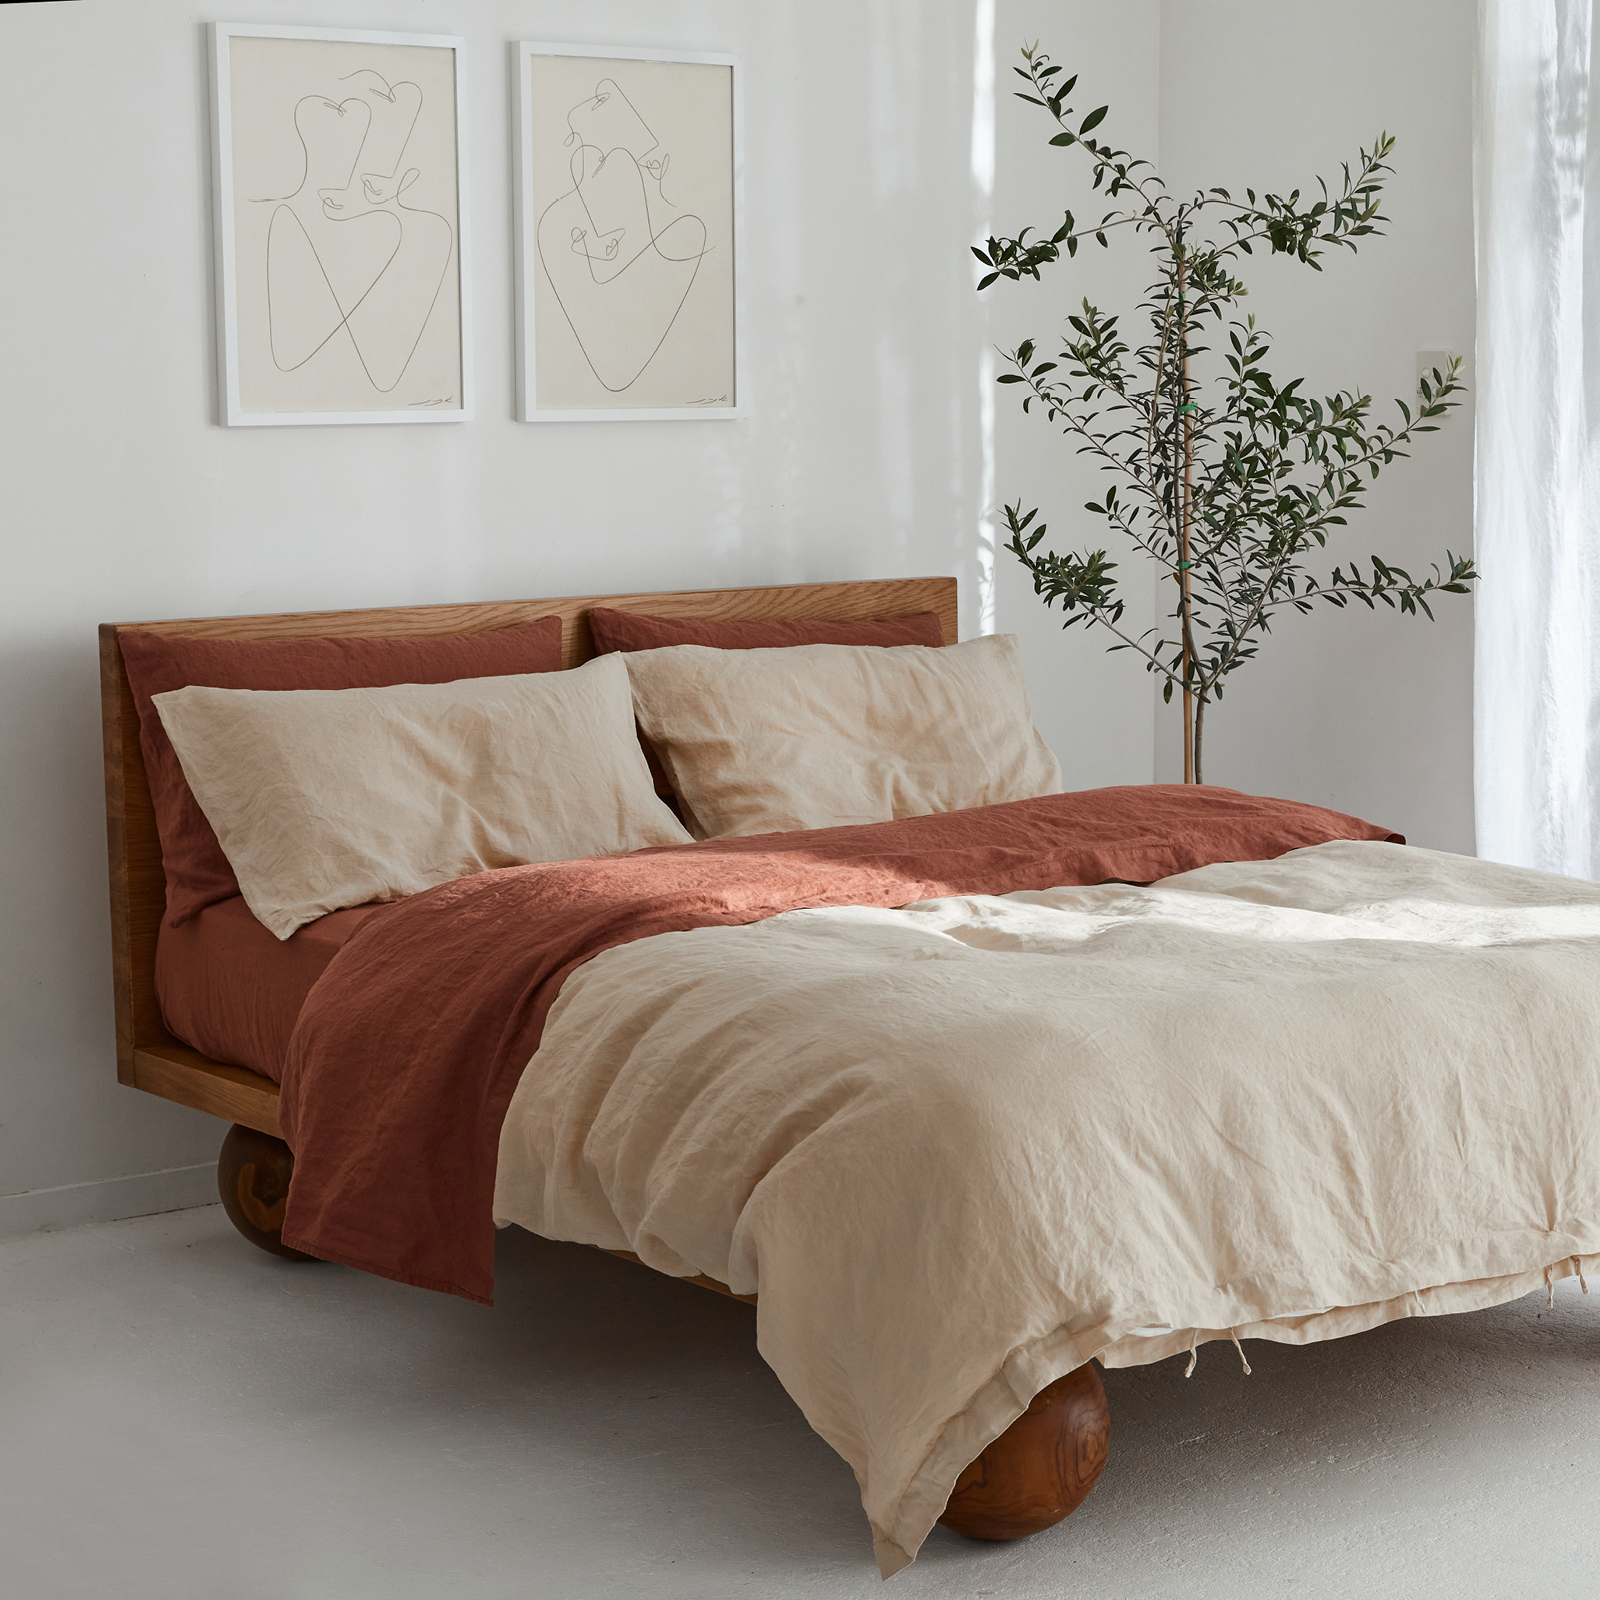 100% pure French linen Duvet Cover in Crème